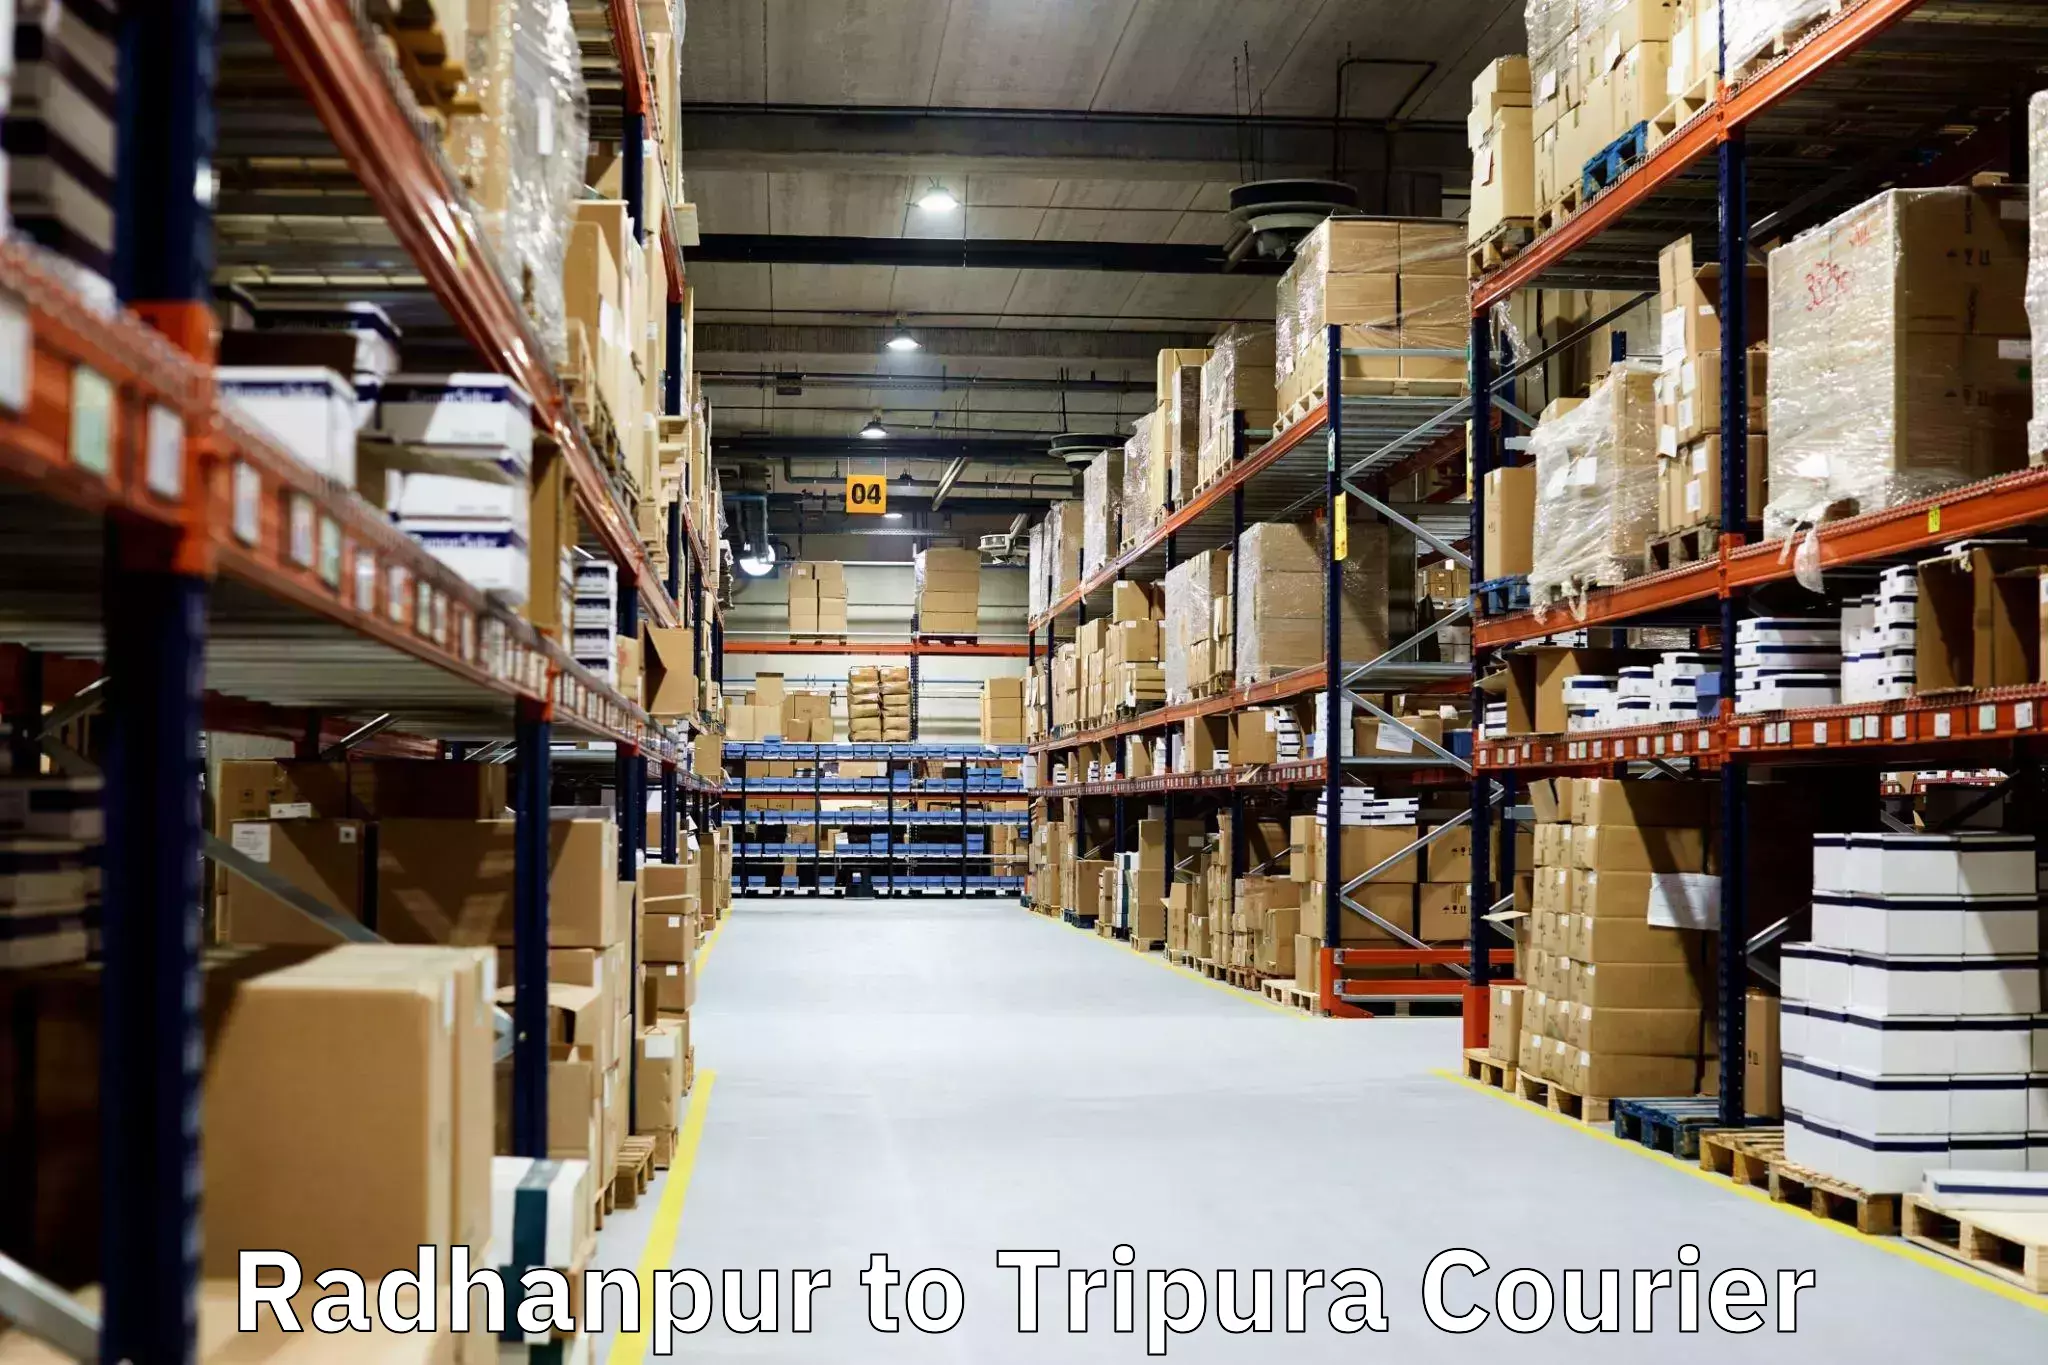 Furniture shipping services in Radhanpur to Tripura